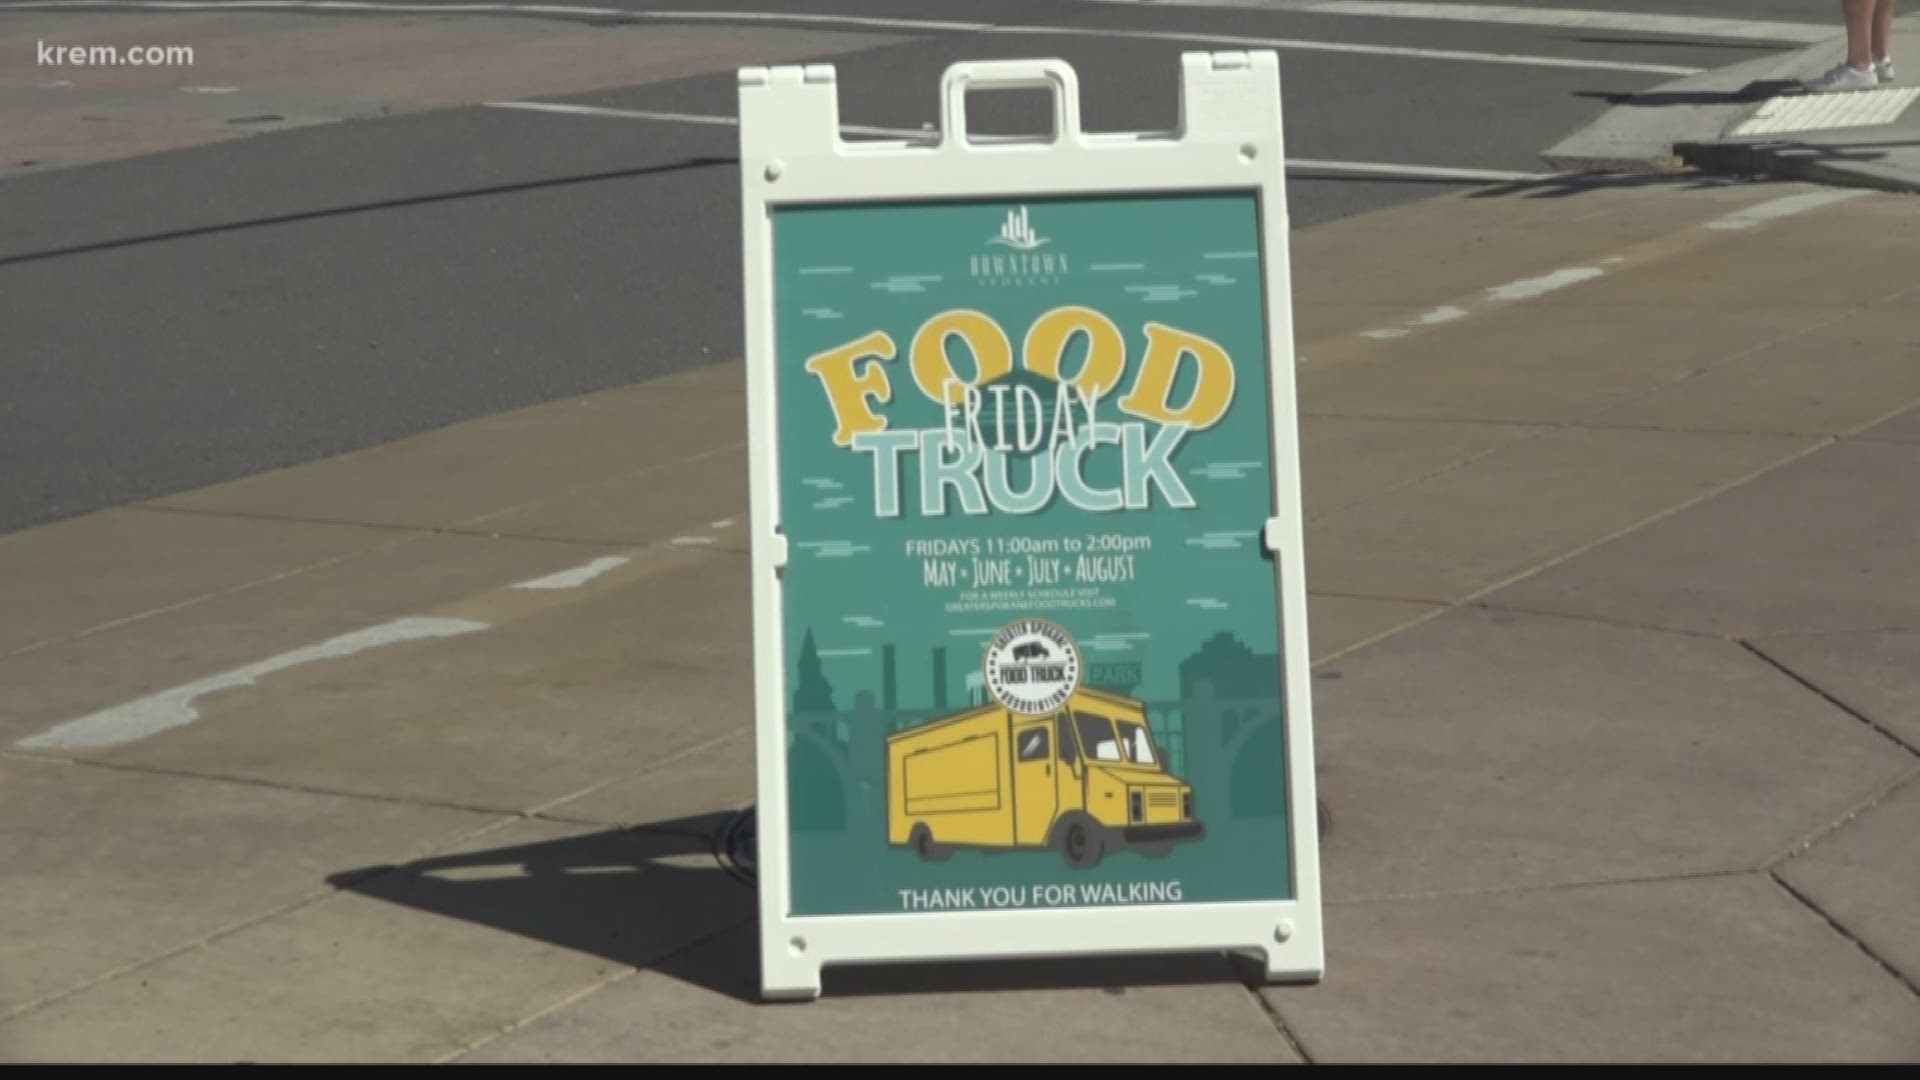 For some students, the summer months can be hard. Especially if they don't know where their next meal is coming from. But a new program created by the Spokane Food Truck Association made sure students stay fed year round.